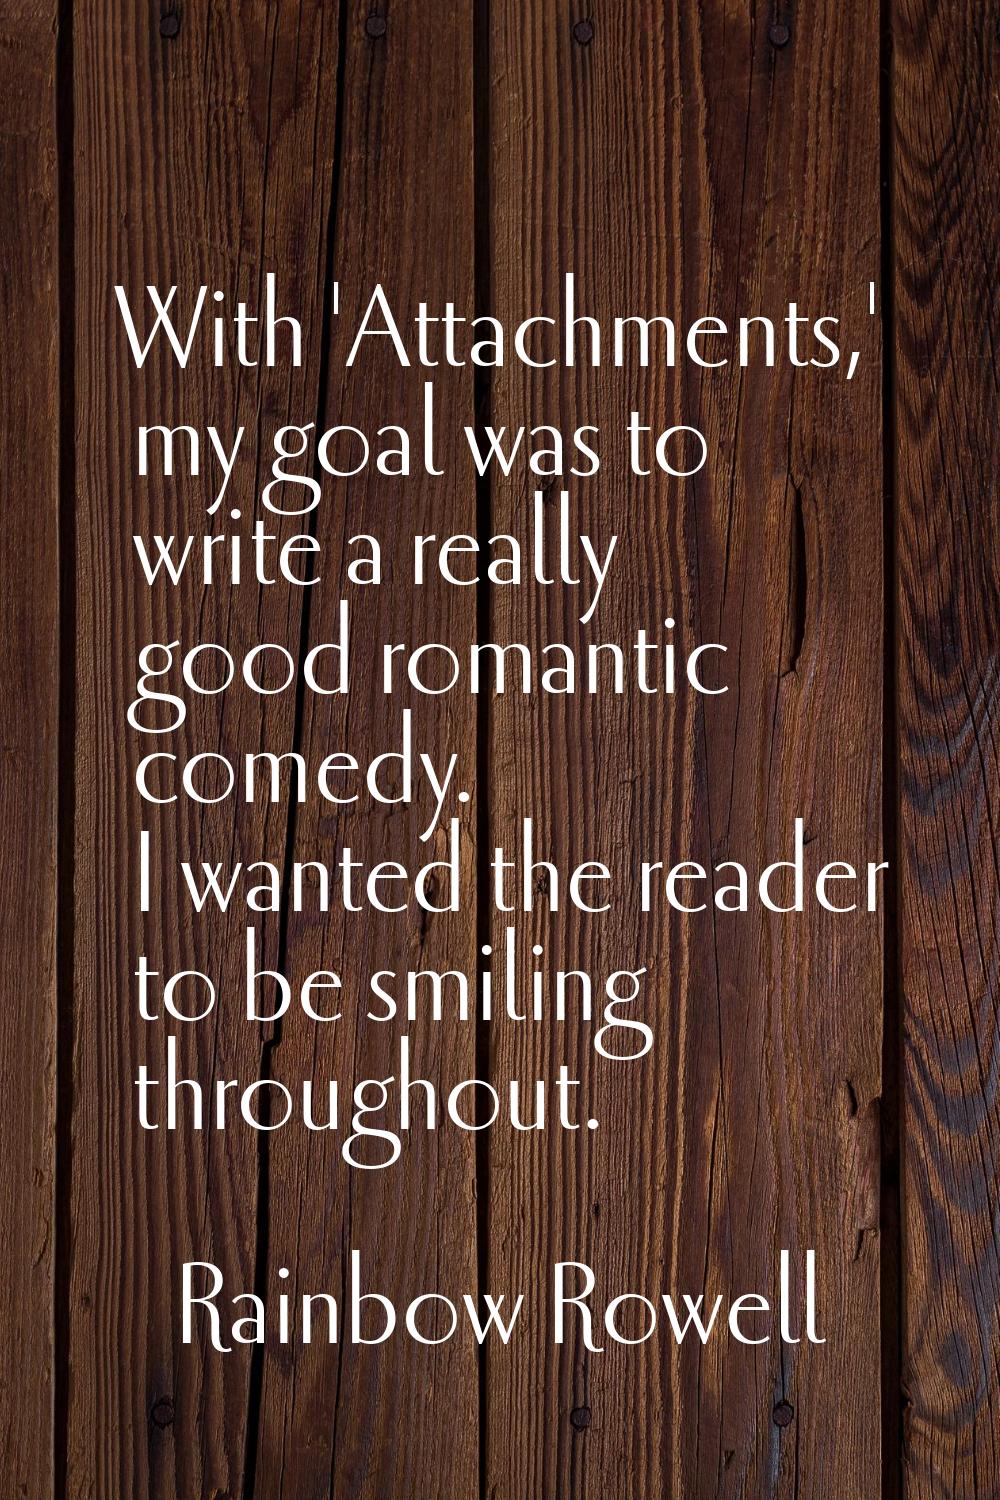 With 'Attachments,' my goal was to write a really good romantic comedy. I wanted the reader to be s